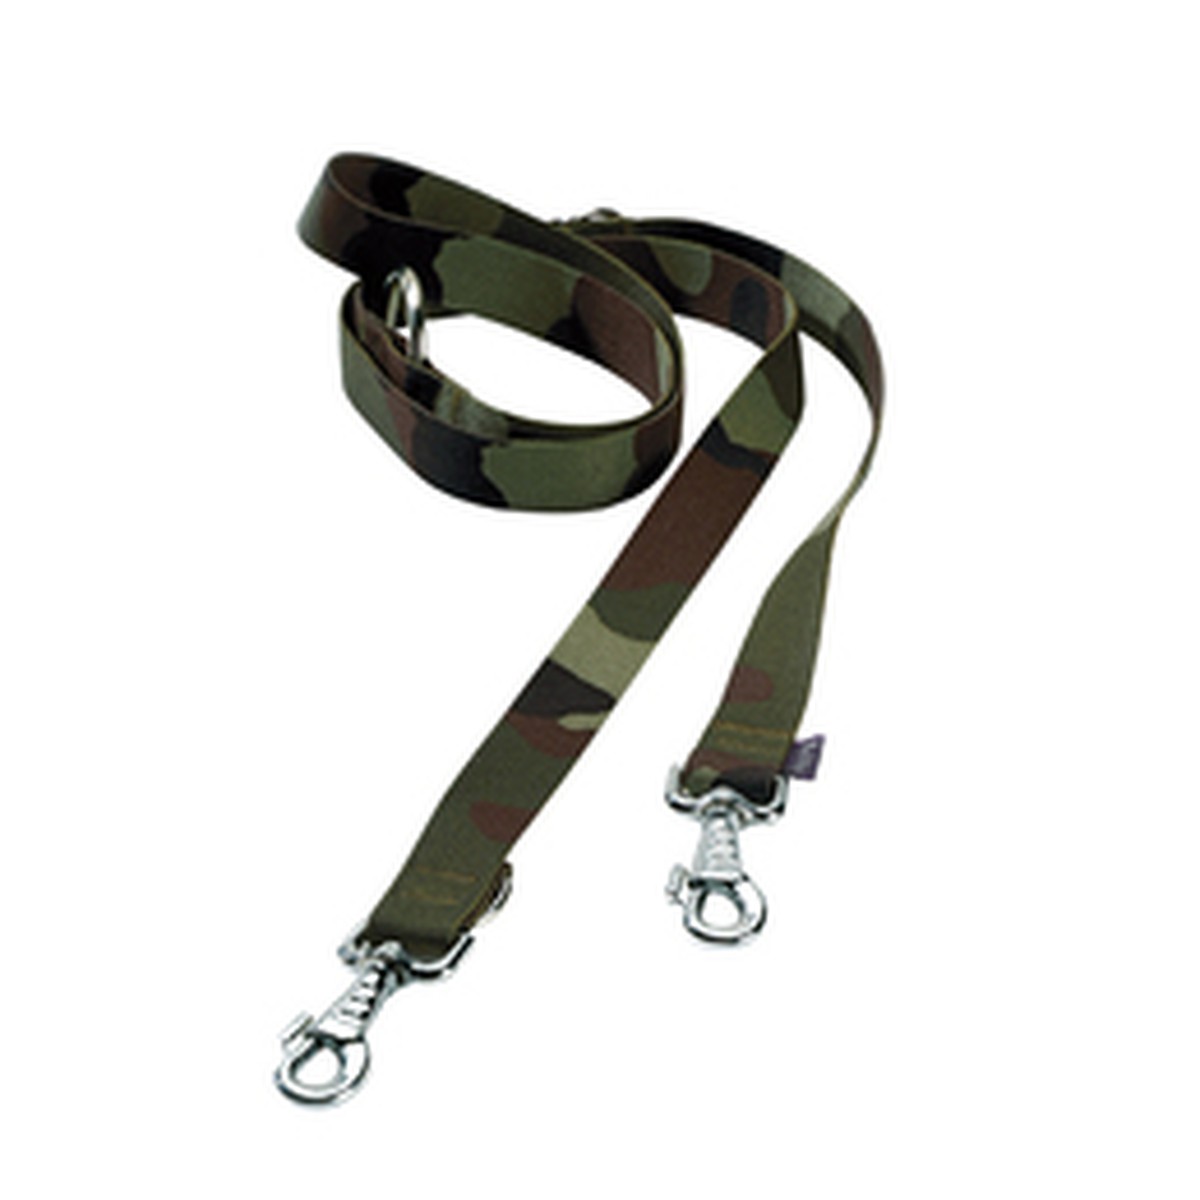 Bobby camouflage Laisse 3p. camouflage t25 Vert militaire 25